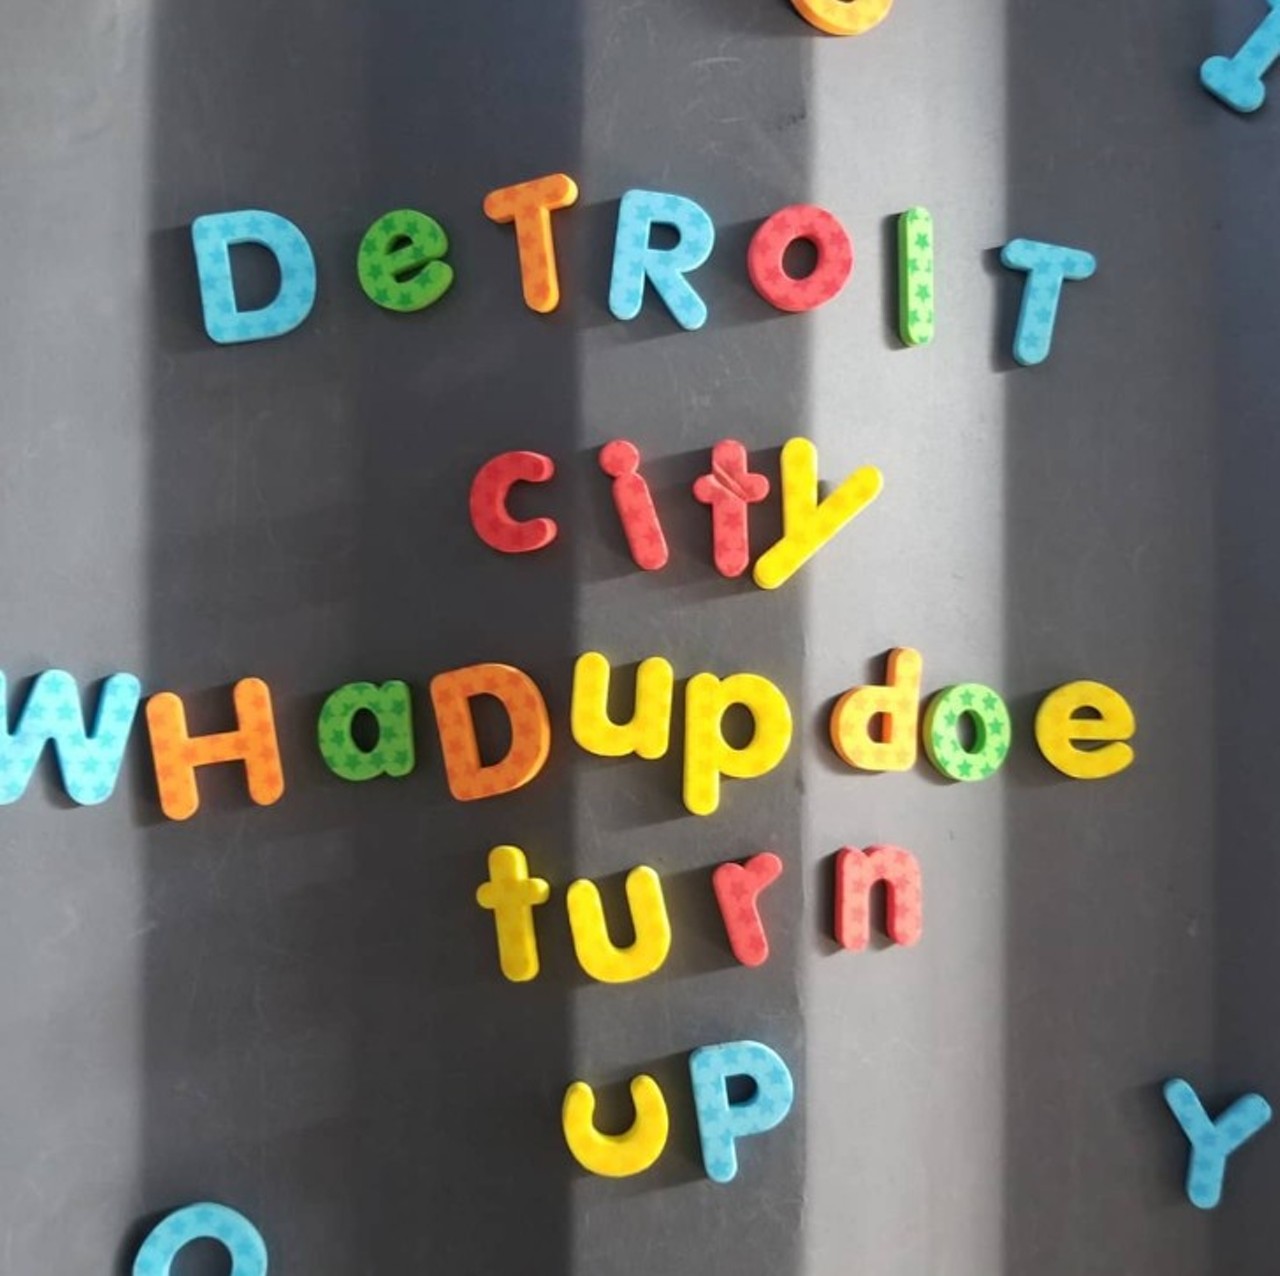 You unconsciously say &#147;Whaddup doe&#148; to people not from Detroit
Oh, I mean. Hey.
Photo courtesy of @coombercaptivates